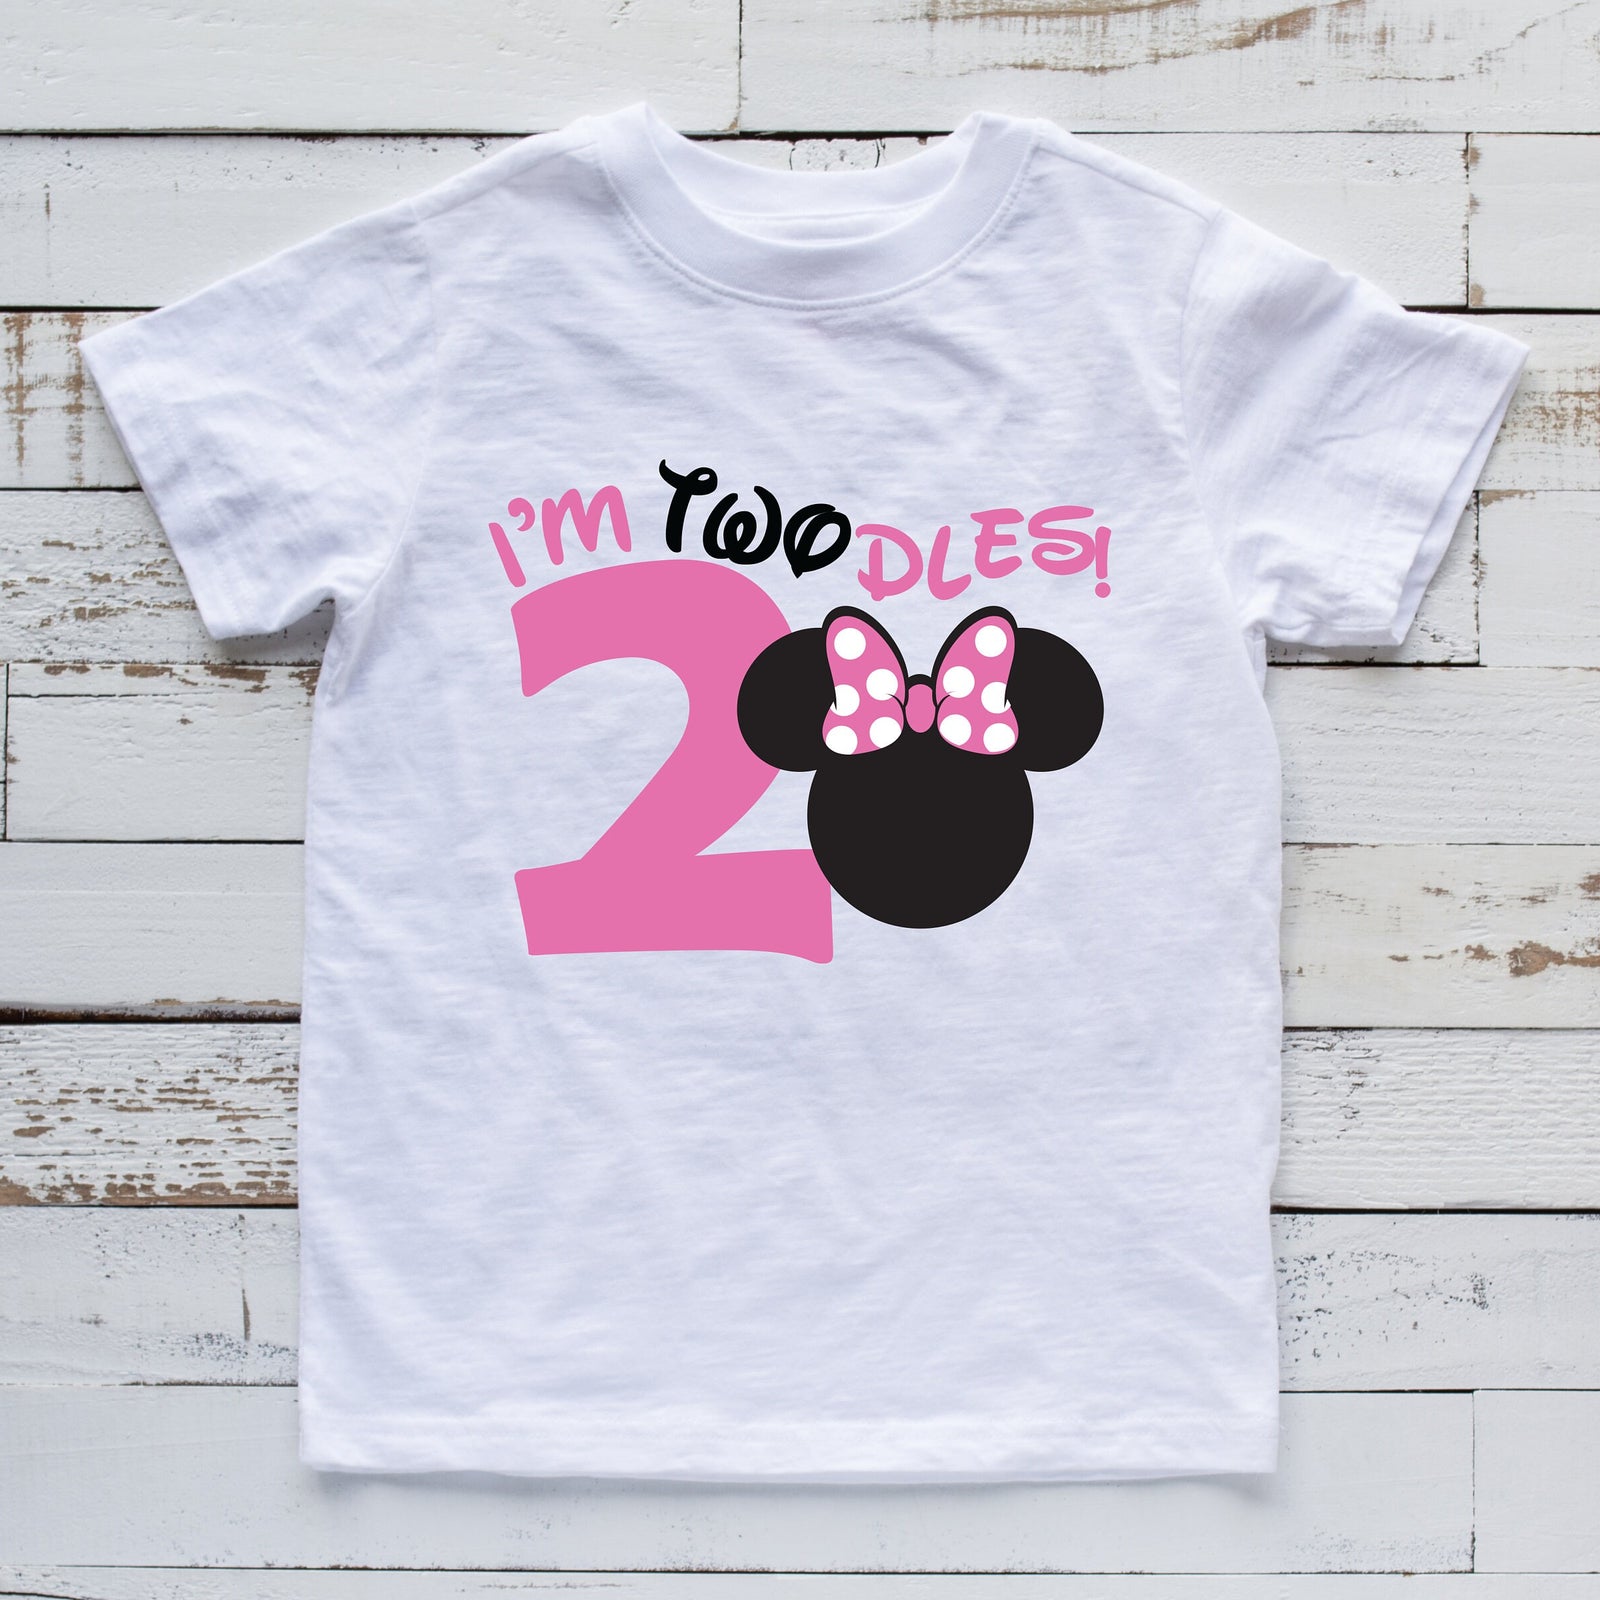 I'm Twodles Minnie Mouse Disney T shirt - Second Birthday - Turning 2 two